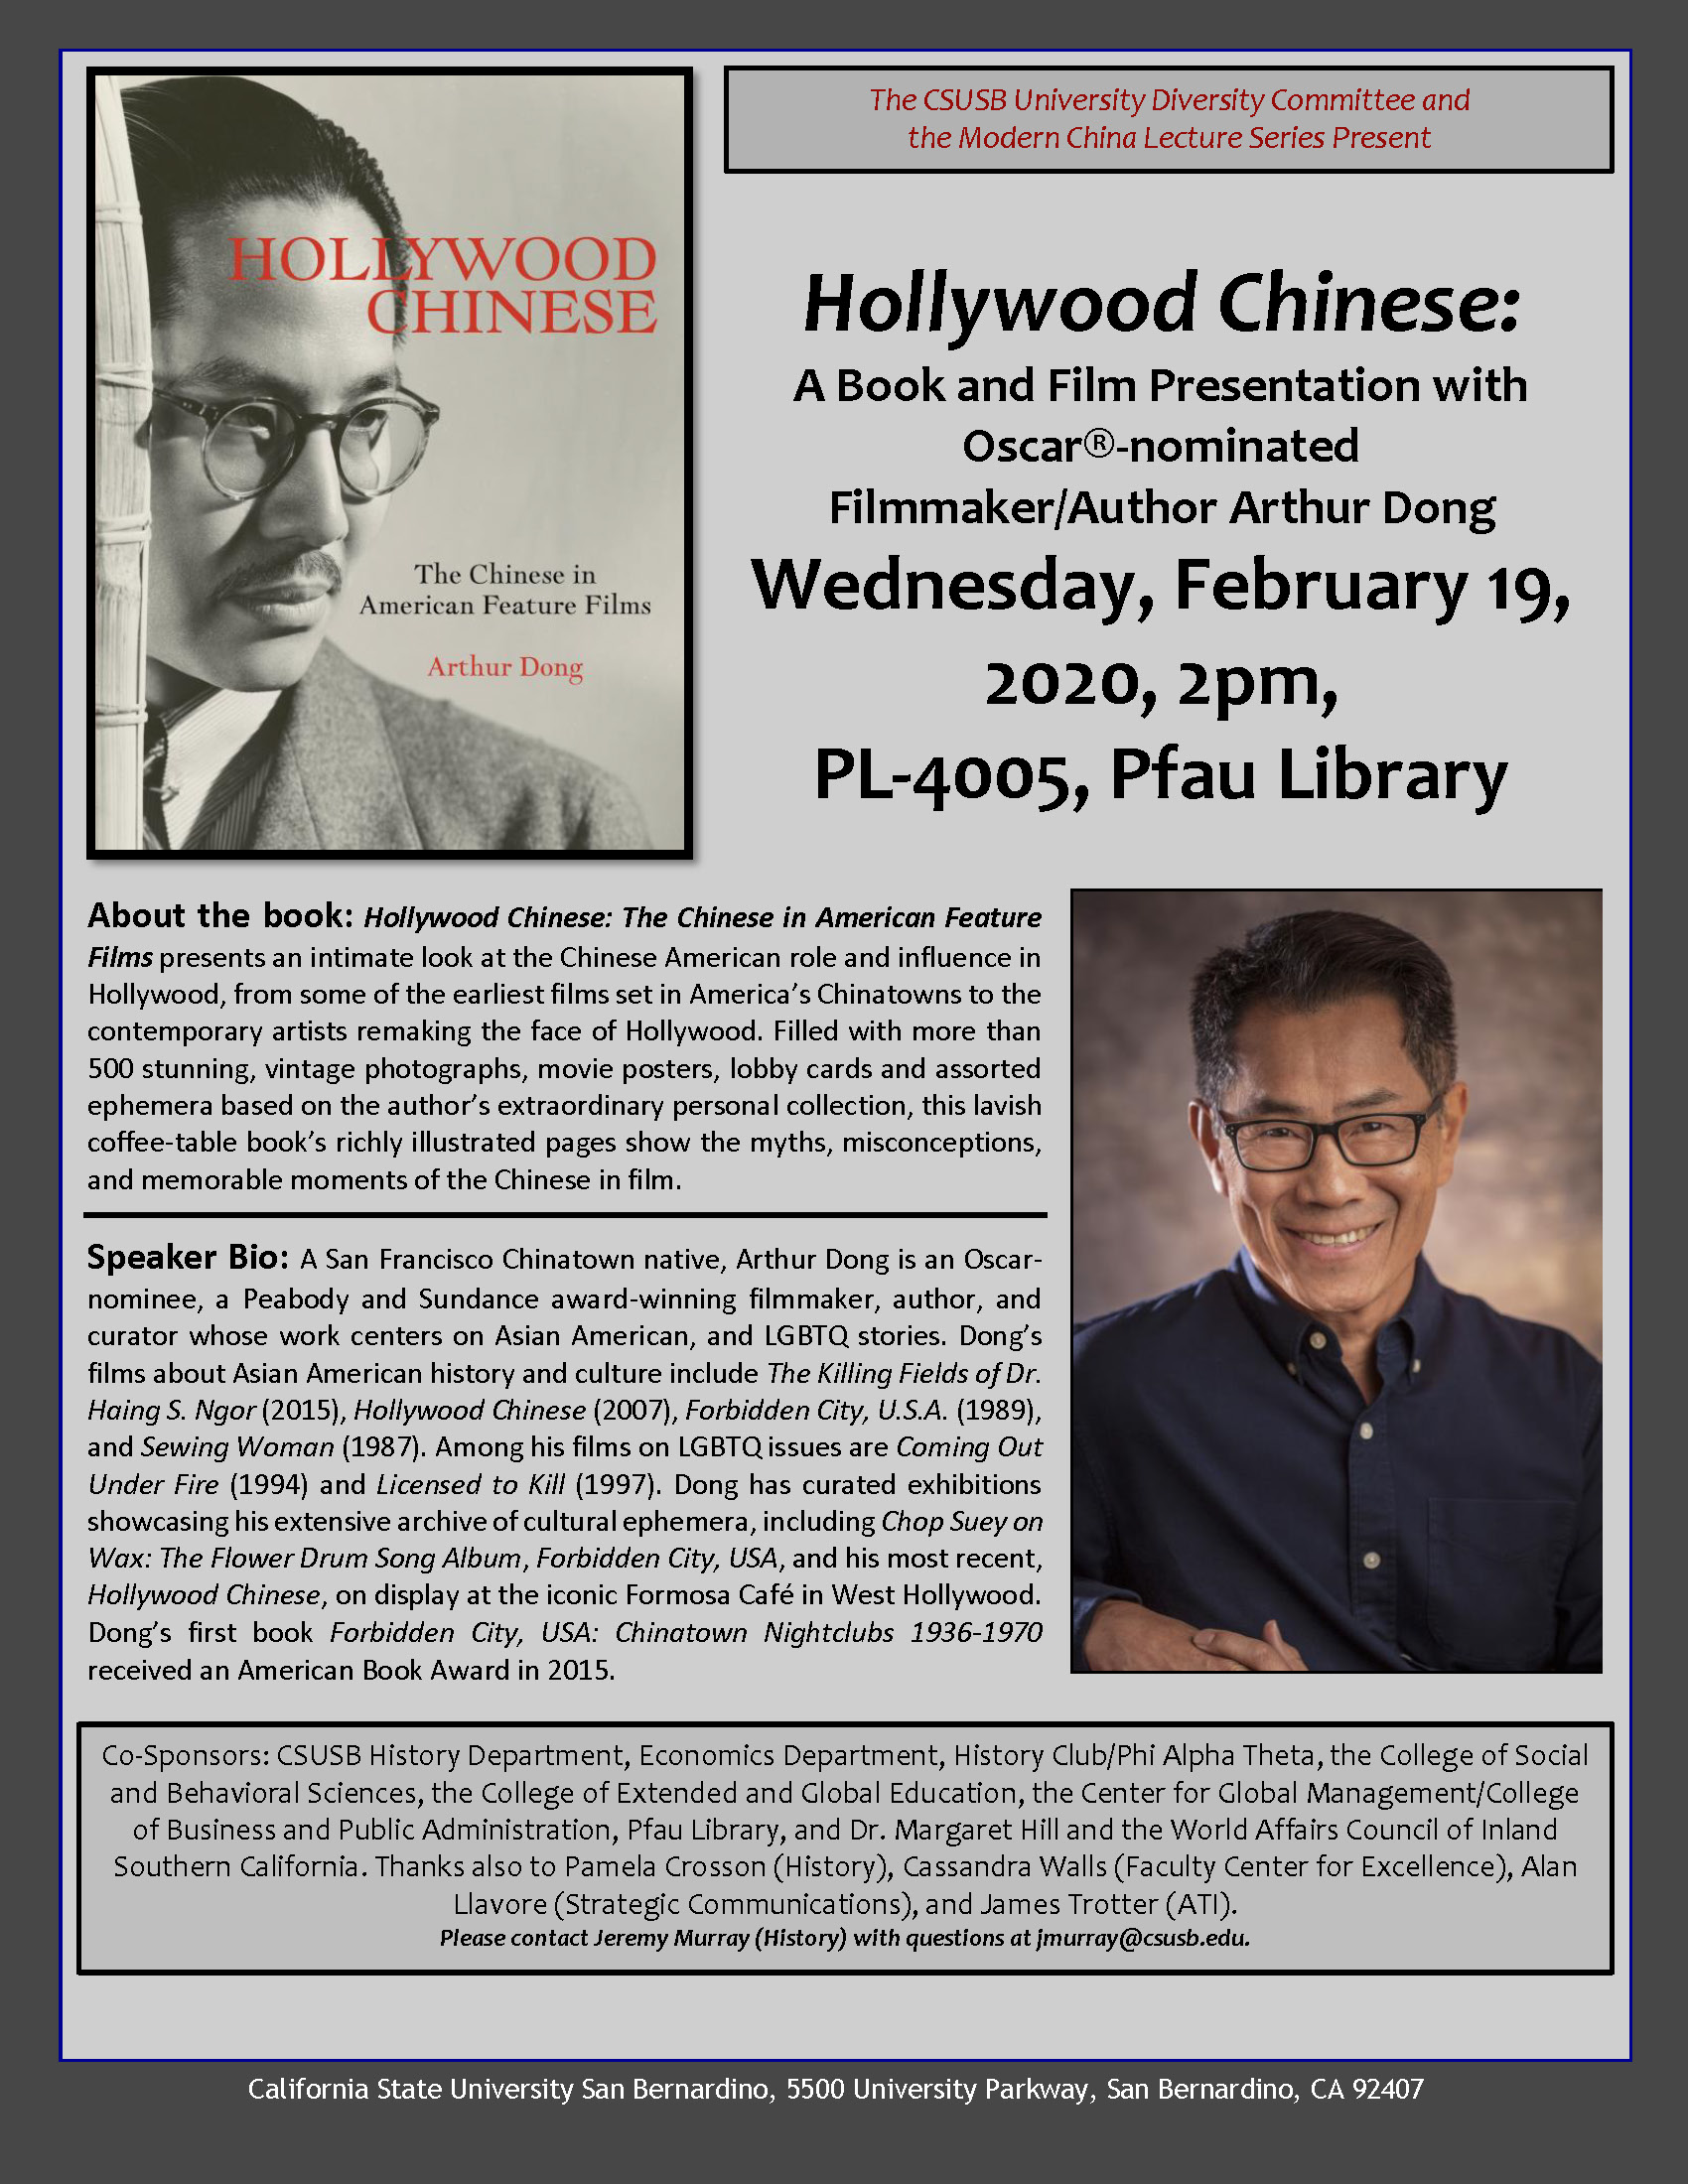 Academy Award-nominated filmmaker and author Arthur Dong to speak at CSUSB on Feb. 19